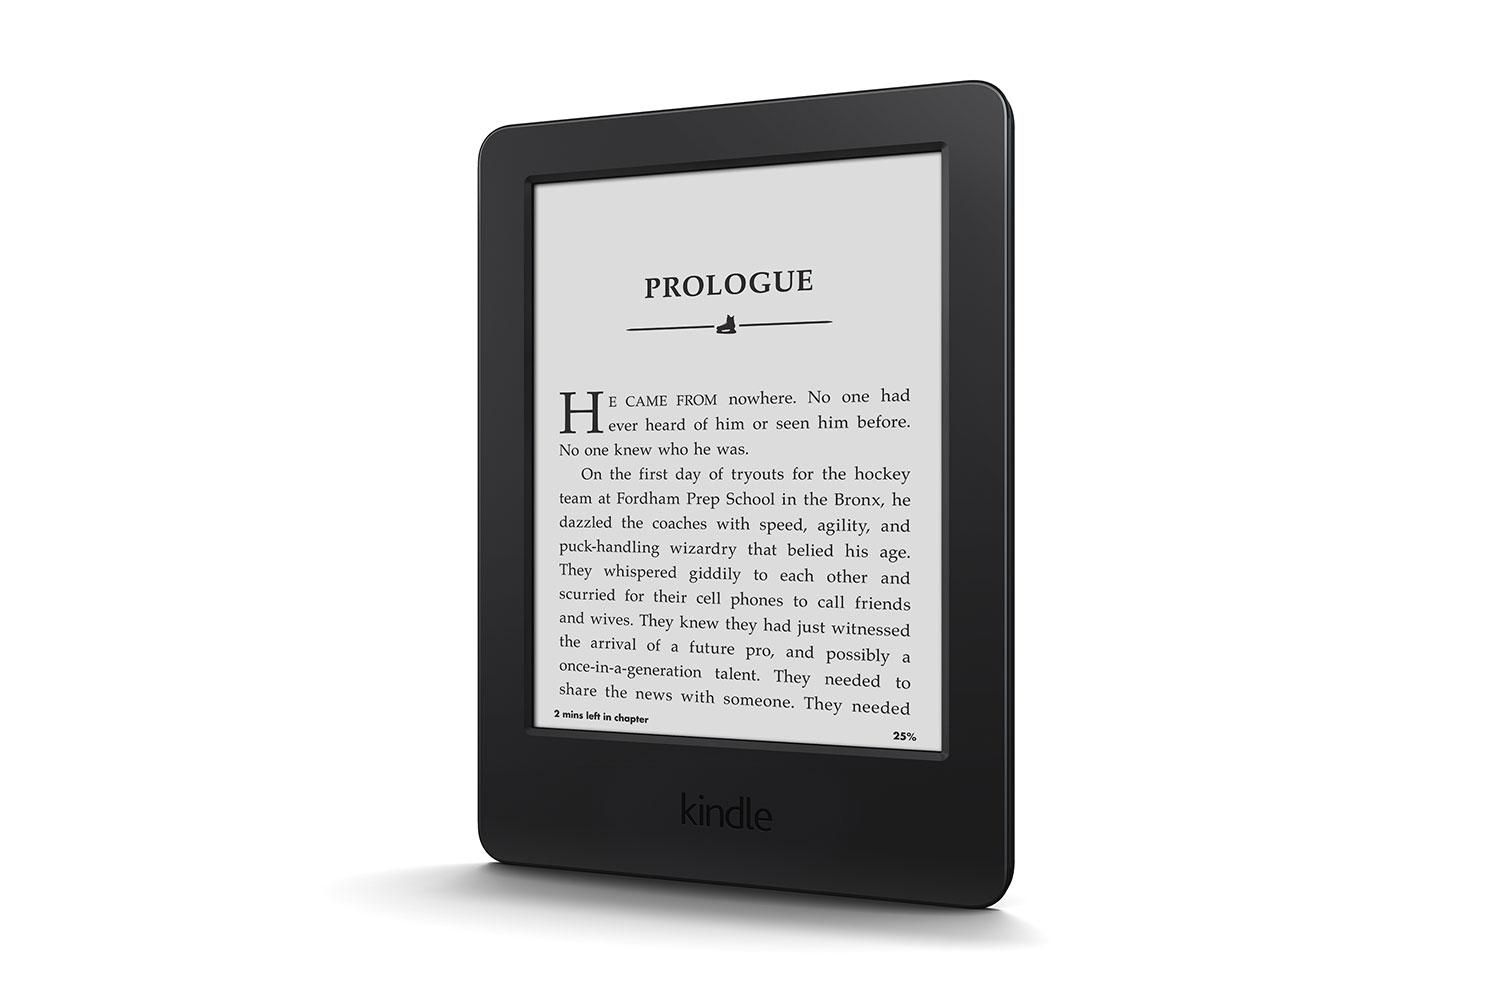 amazon launches high end voyage e reader kindle angle press image